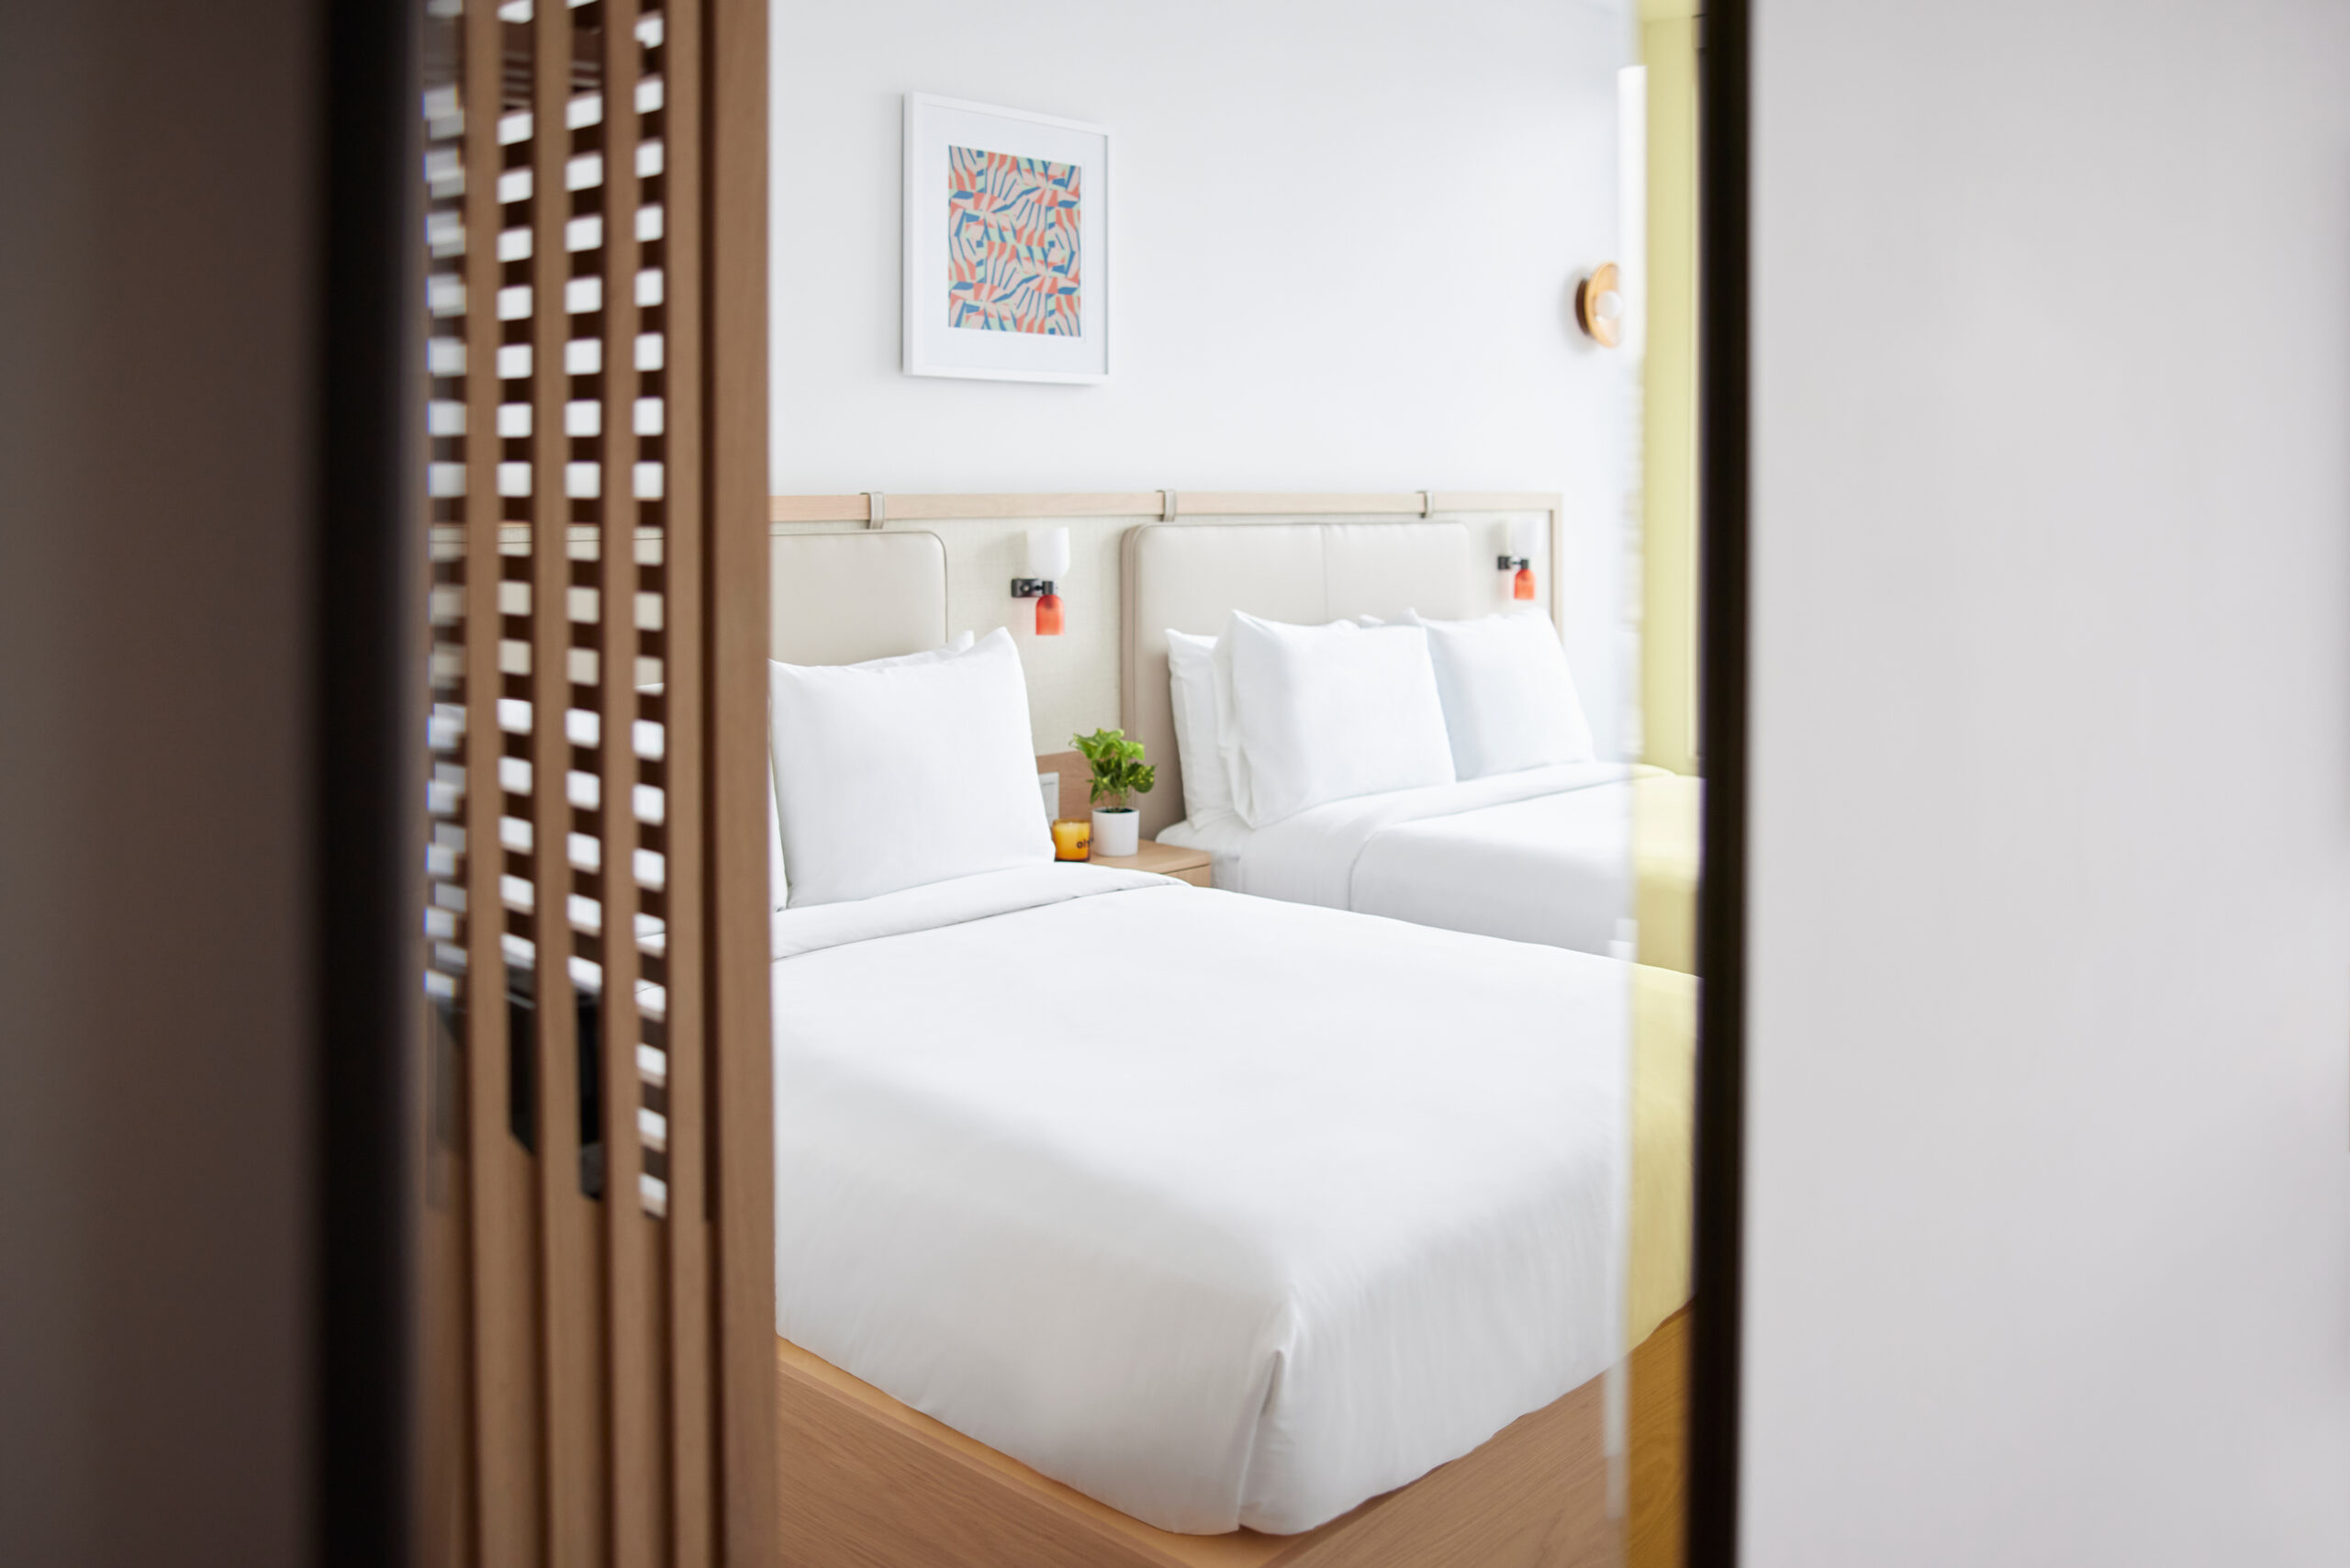 Arlo Wynwood Two Double hotel room mirror and beds